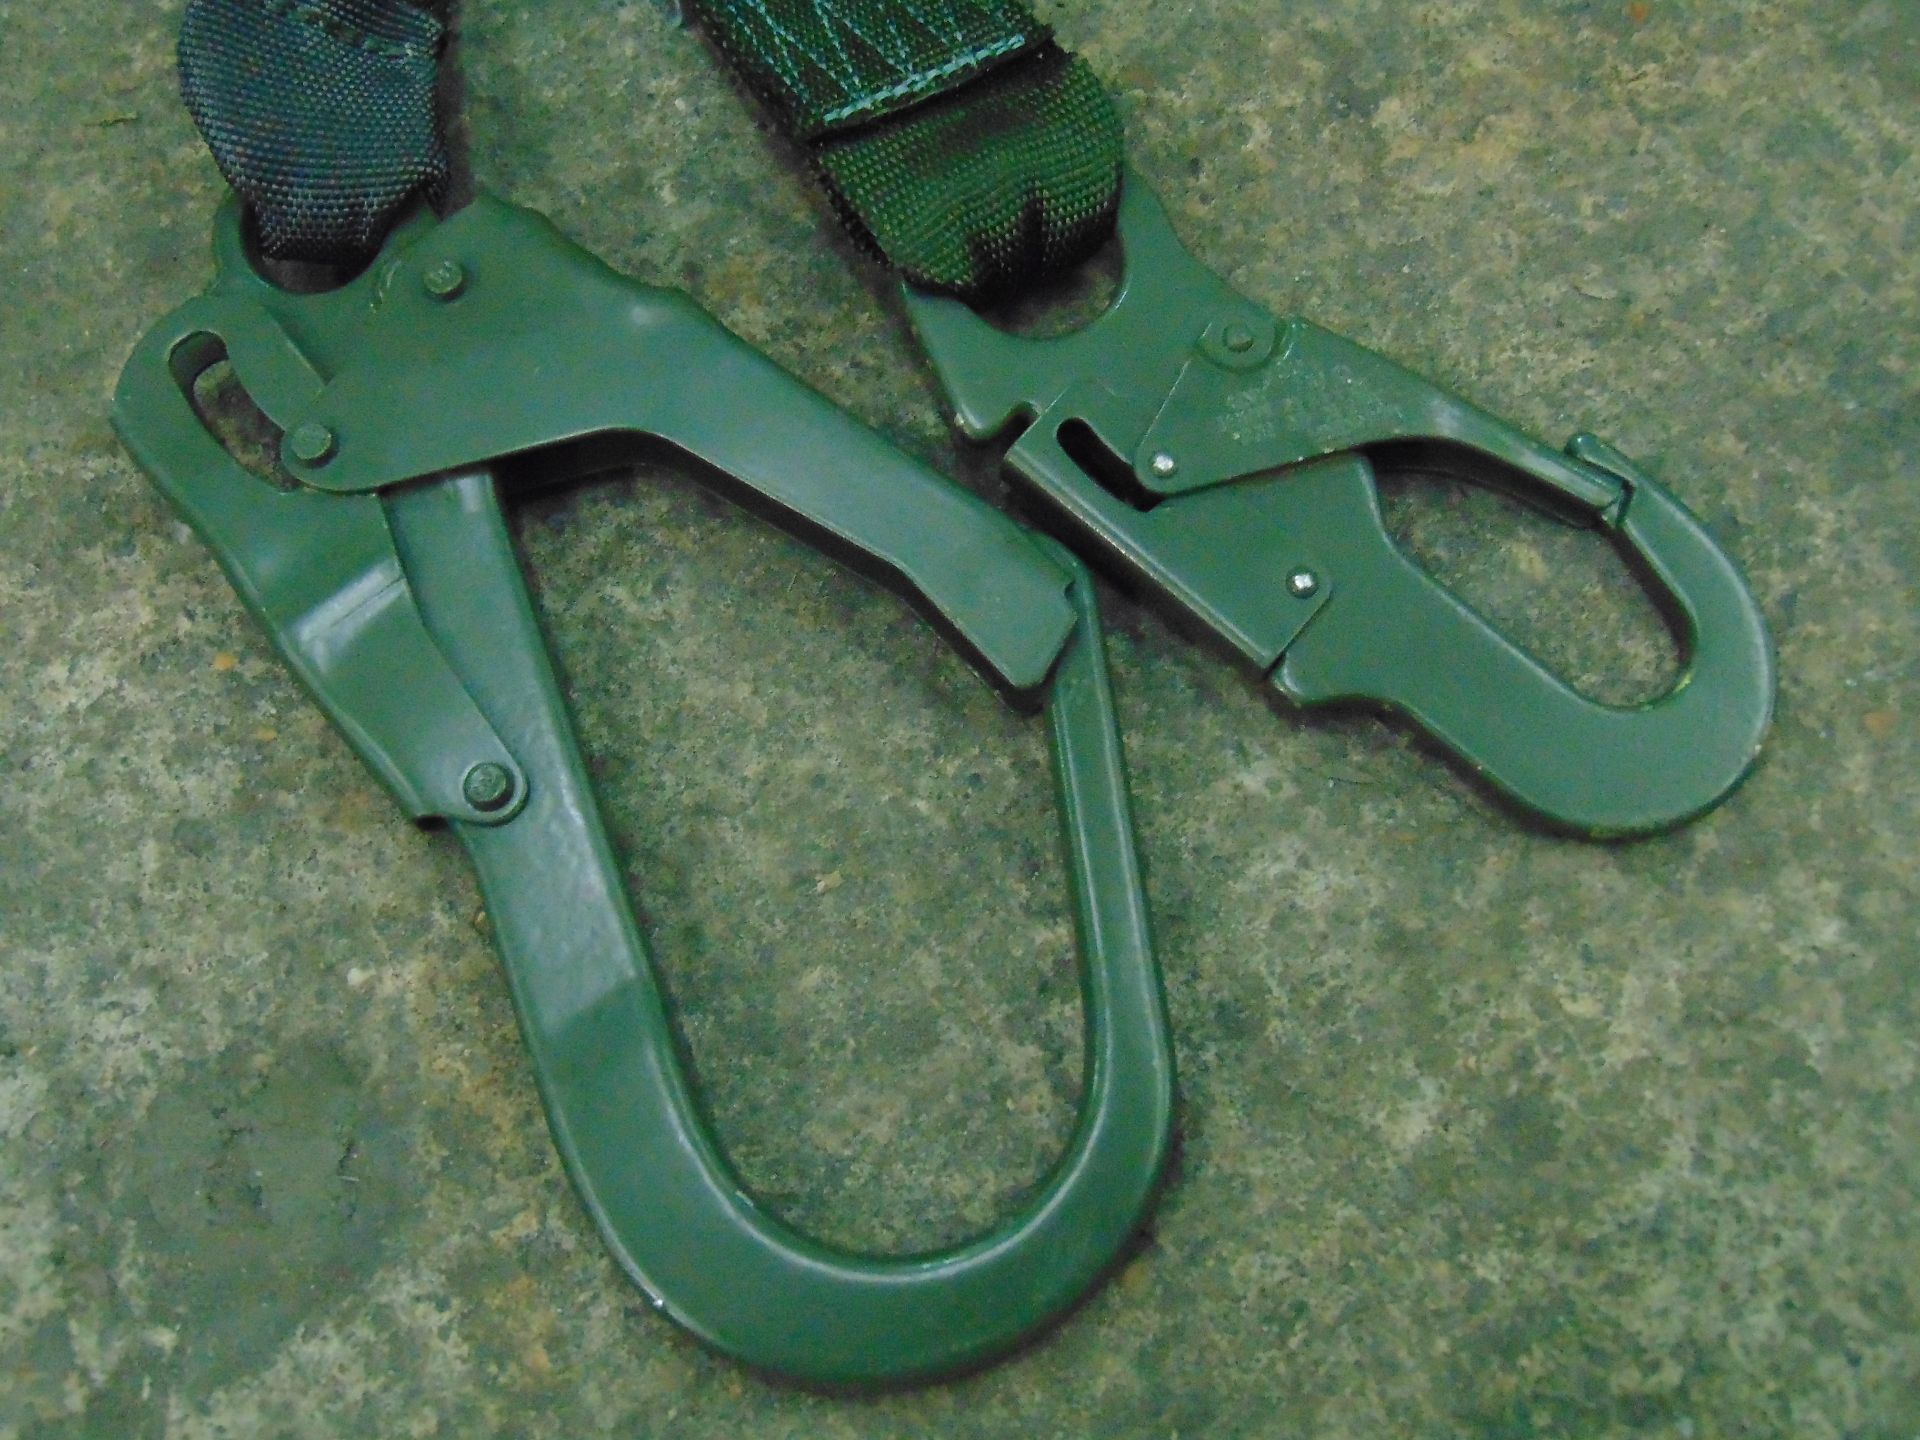 Spanset Full Body Harness with Work Position Lanyards etc - Image 11 of 24